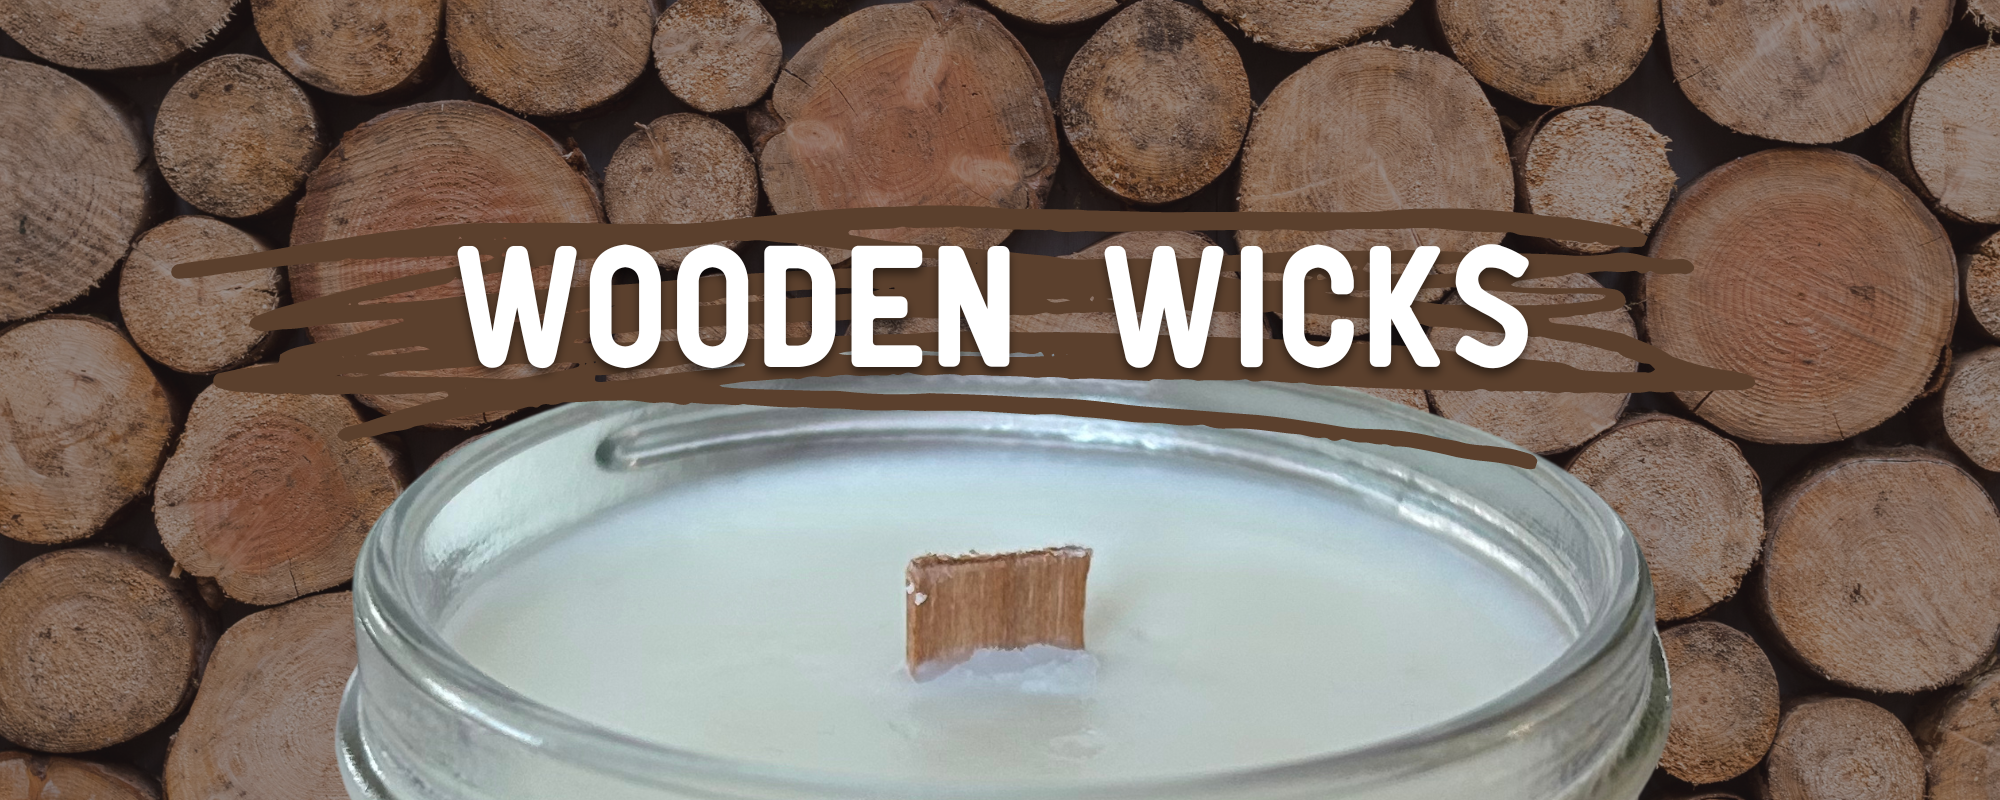 All about wooden wicks